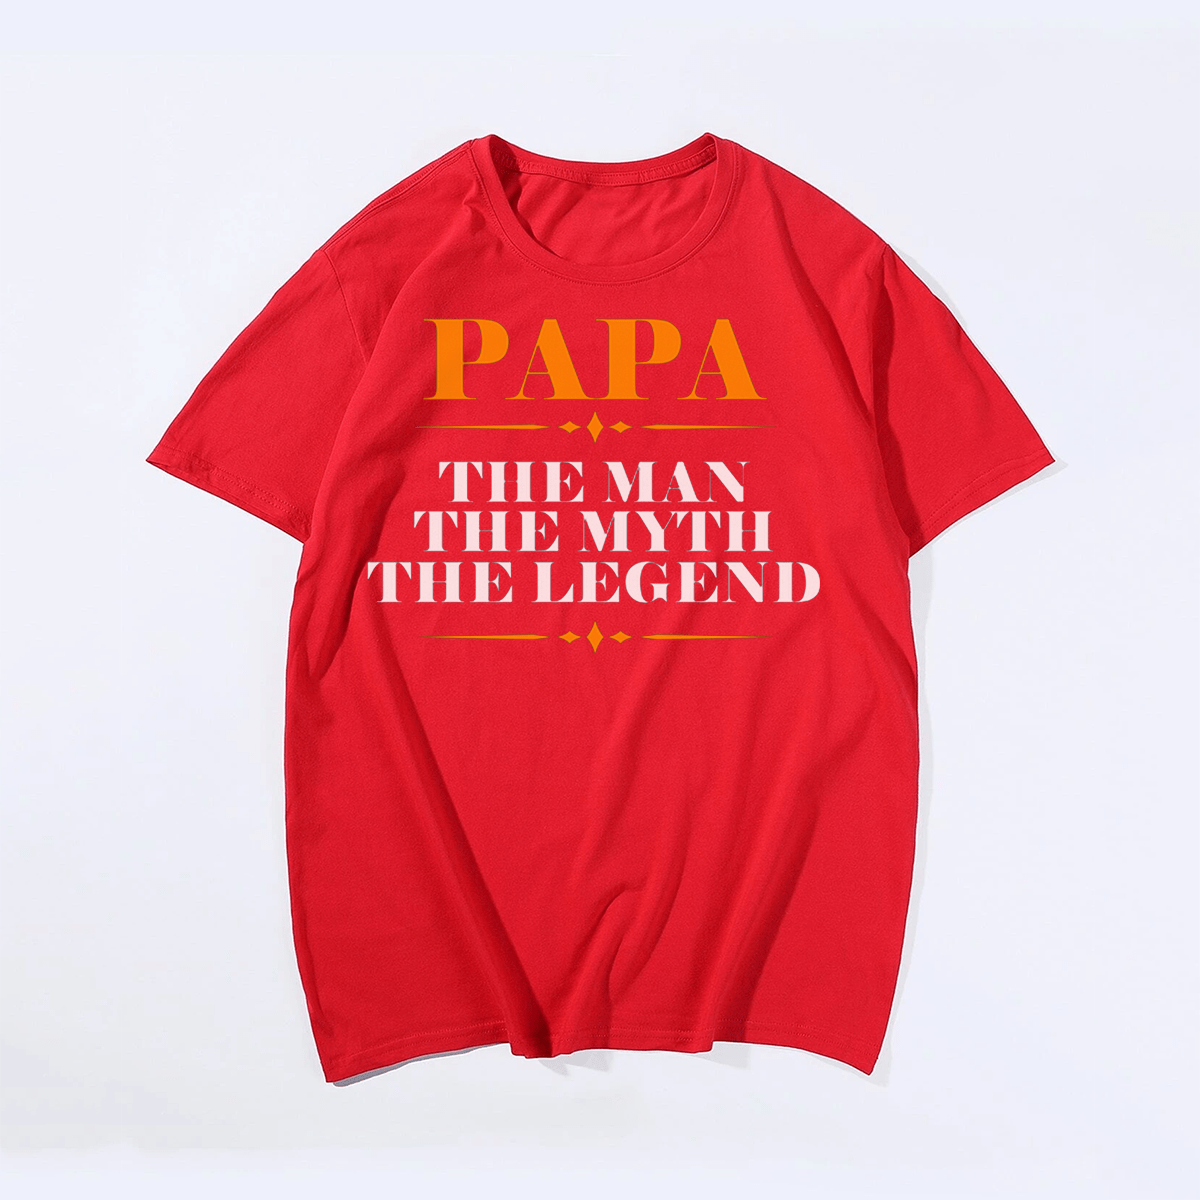 Papa The Man The Myth The Legend T-shirt for Men, Oversize Plus Size Big & Tall Man Clothing